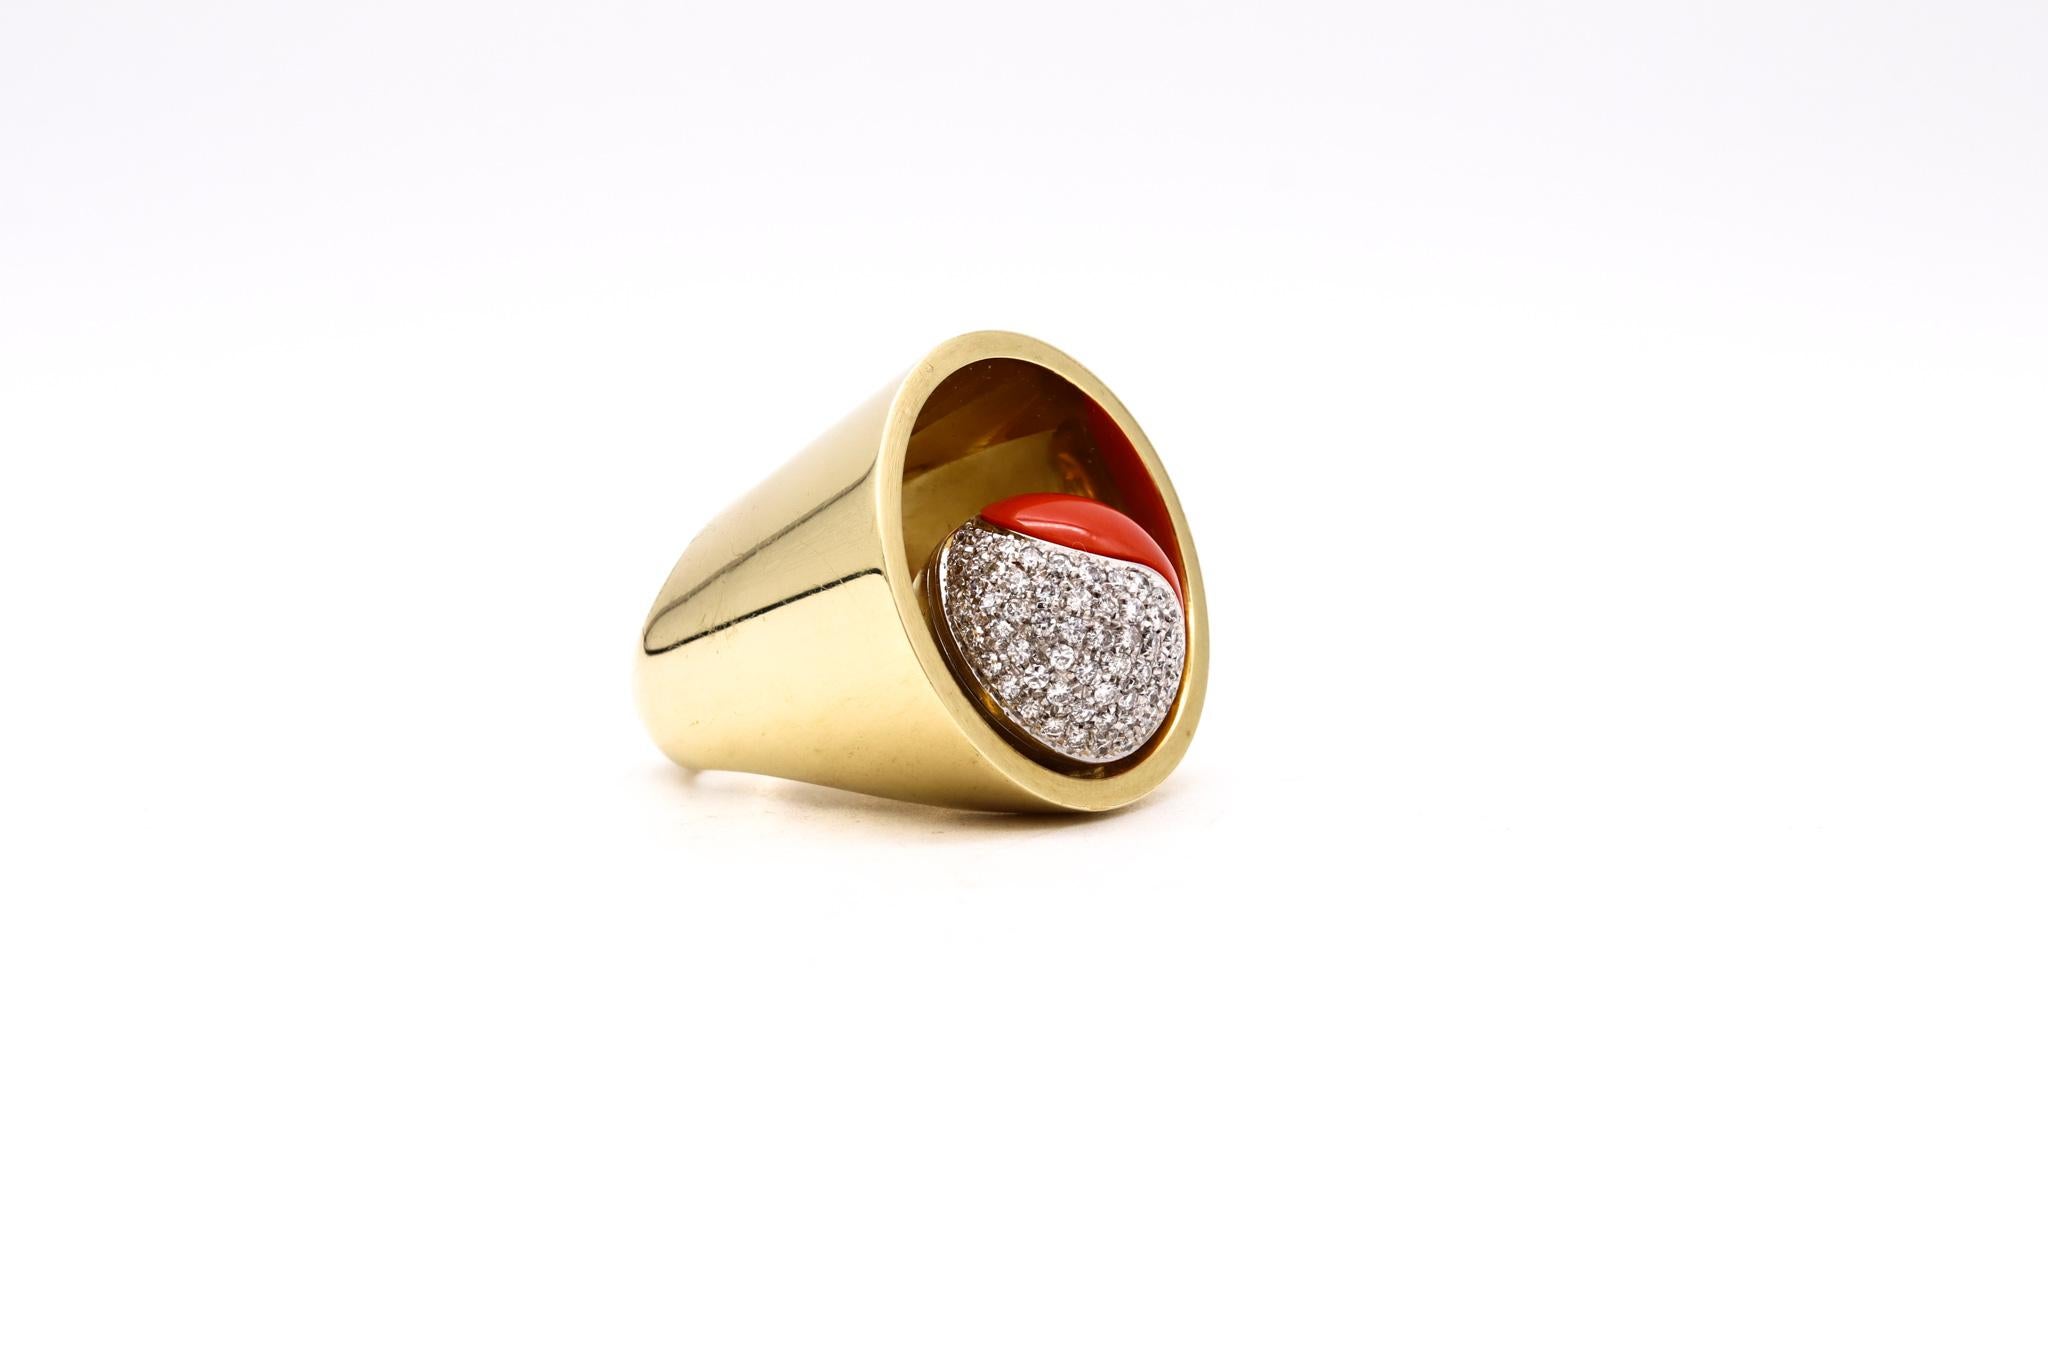 Spatialism 1970 Artistic Sculptural Yin Yang Ring 18Kt Gold With Diamonds Coral In Excellent Condition For Sale In Miami, FL